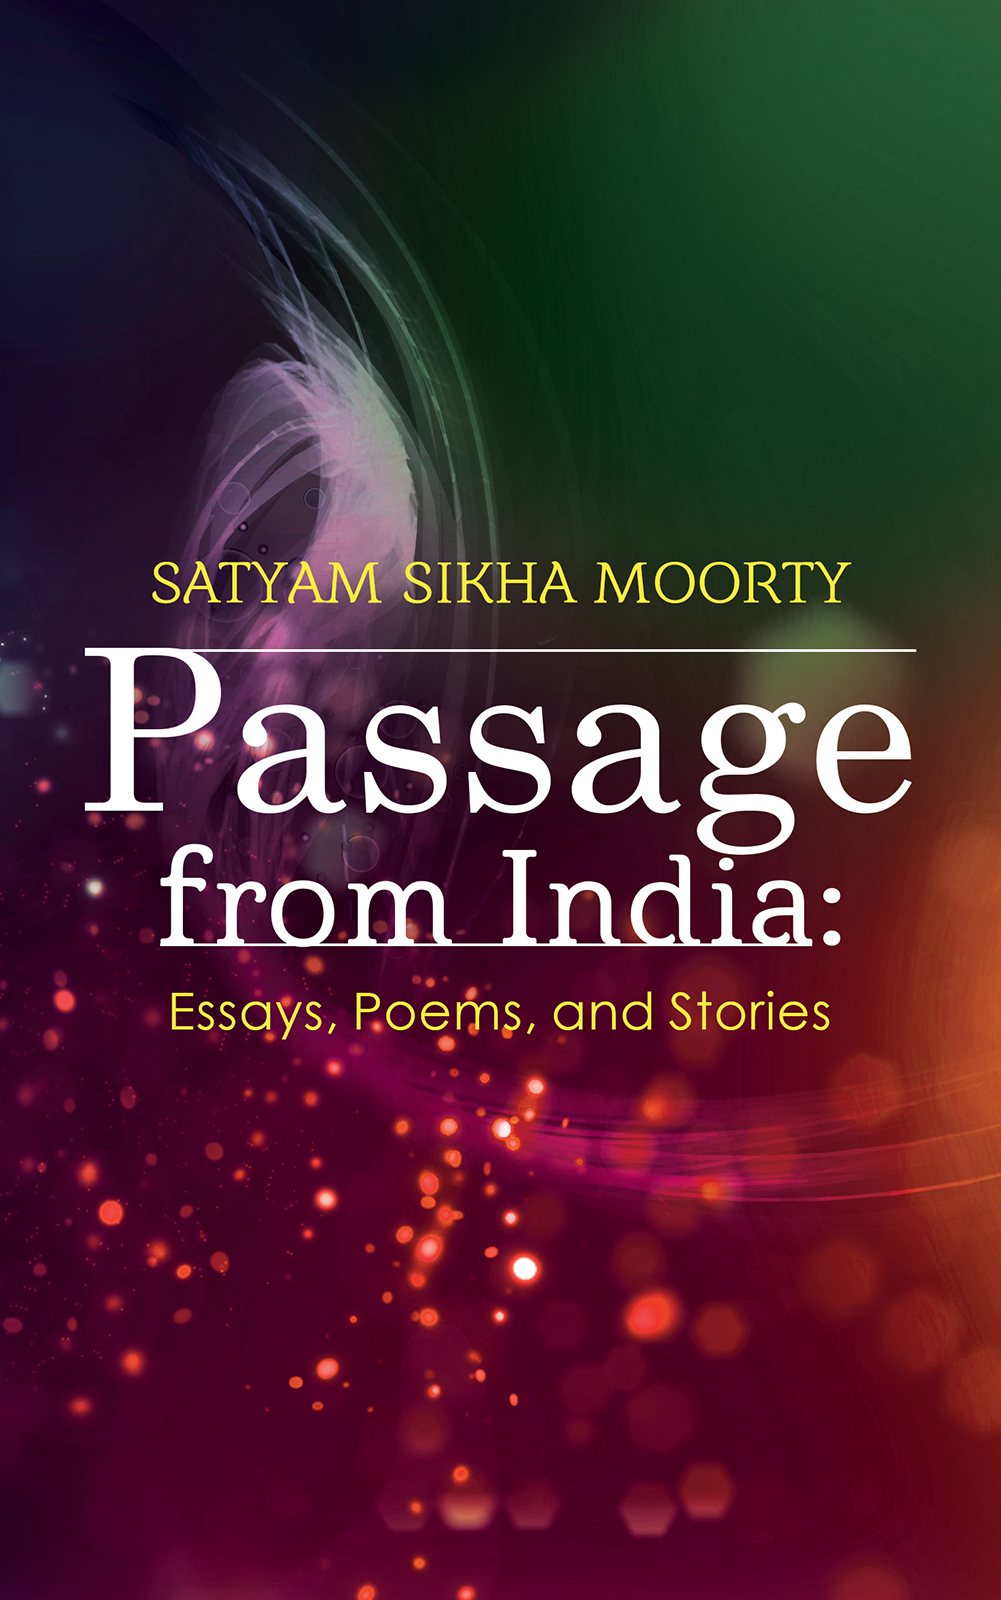 This image is the cover for the book Passage from India: Essays, Poems, and Stories